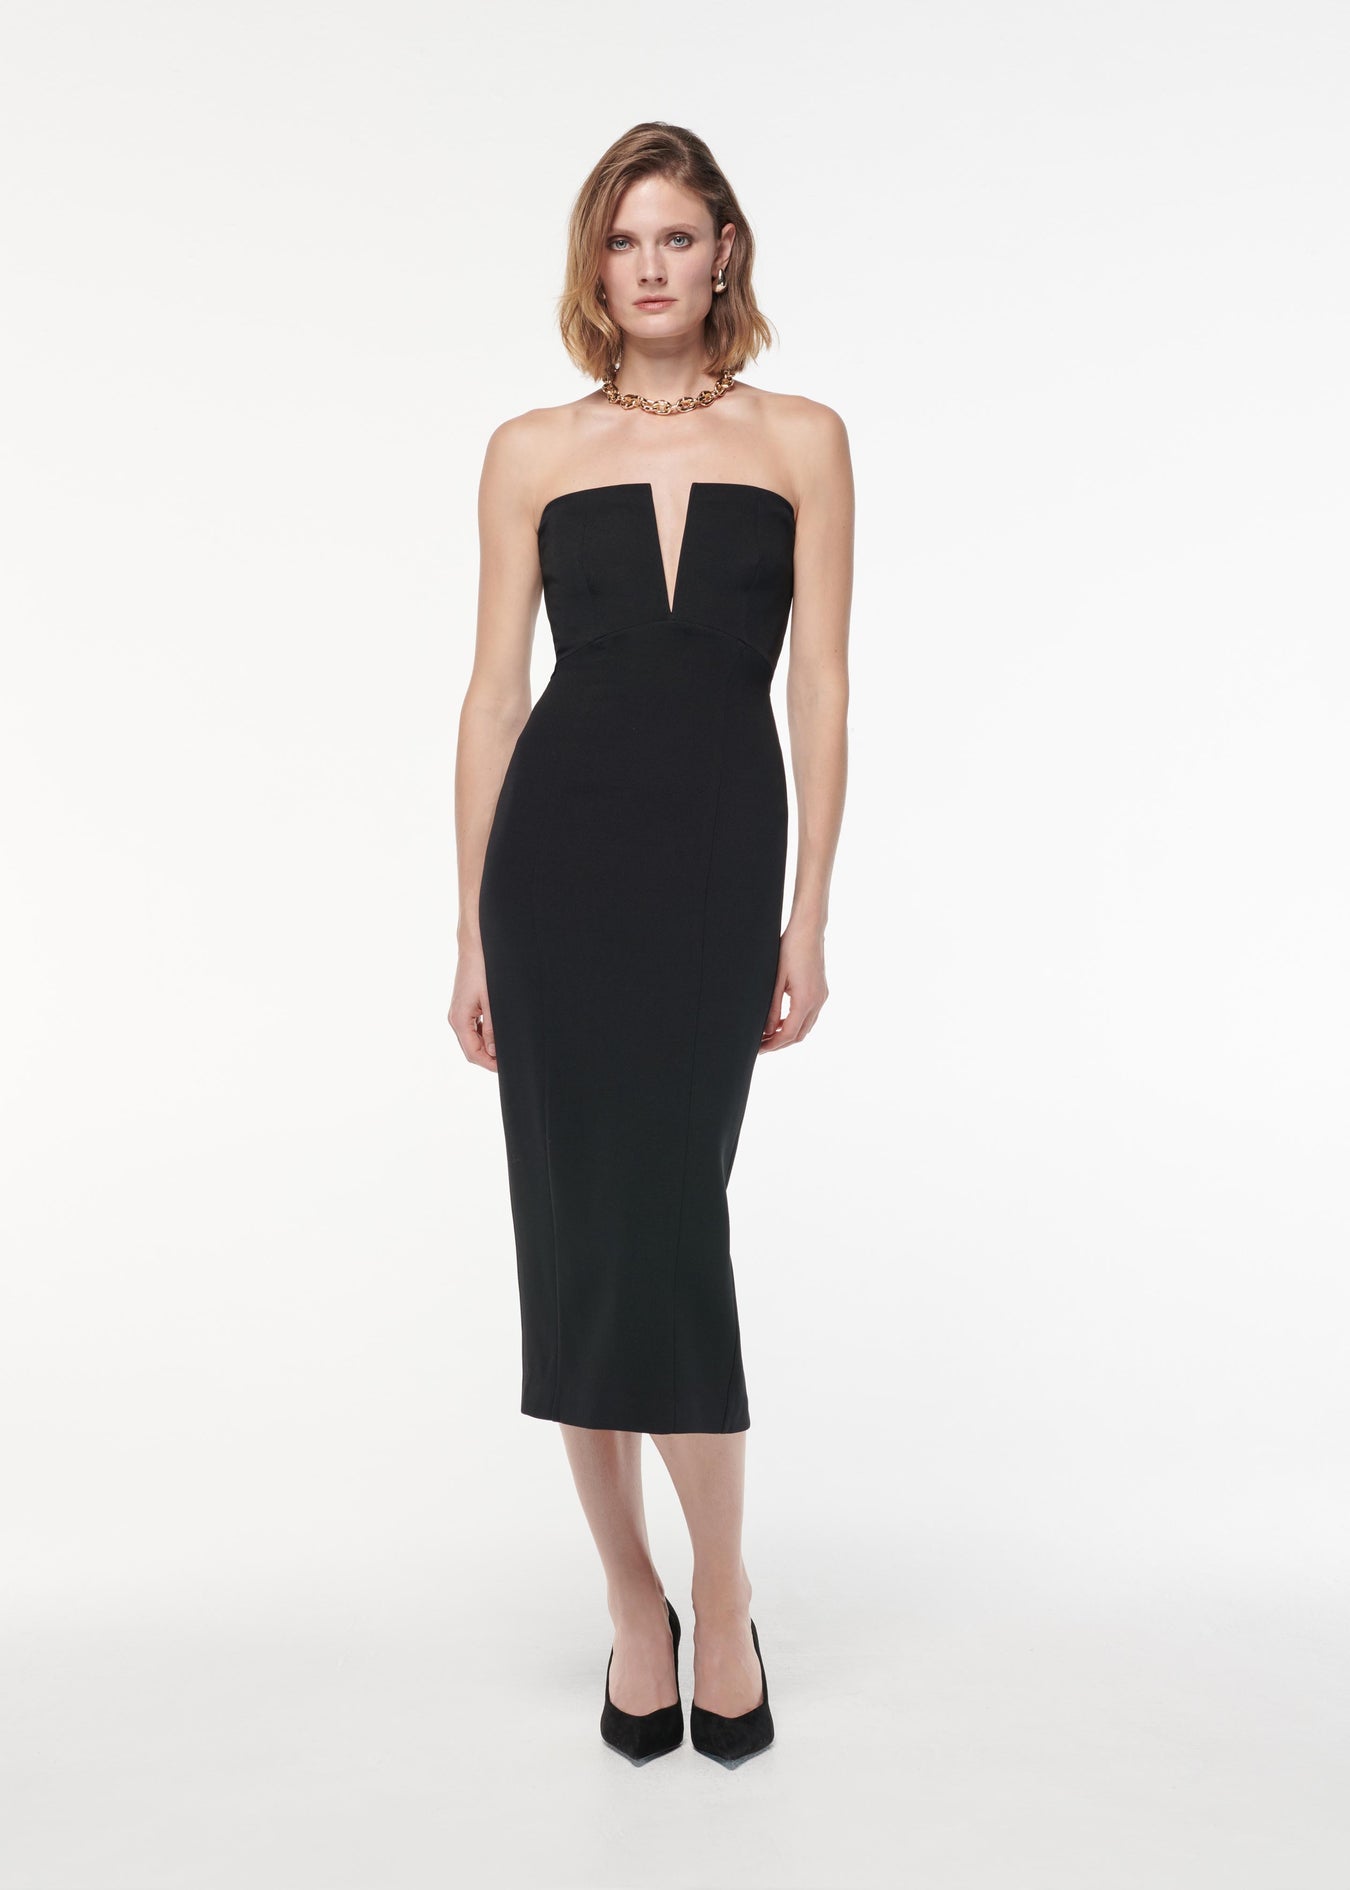 A photograph of a woman wearing a Strapless Stretch Wool Silk Midi Dress in Black